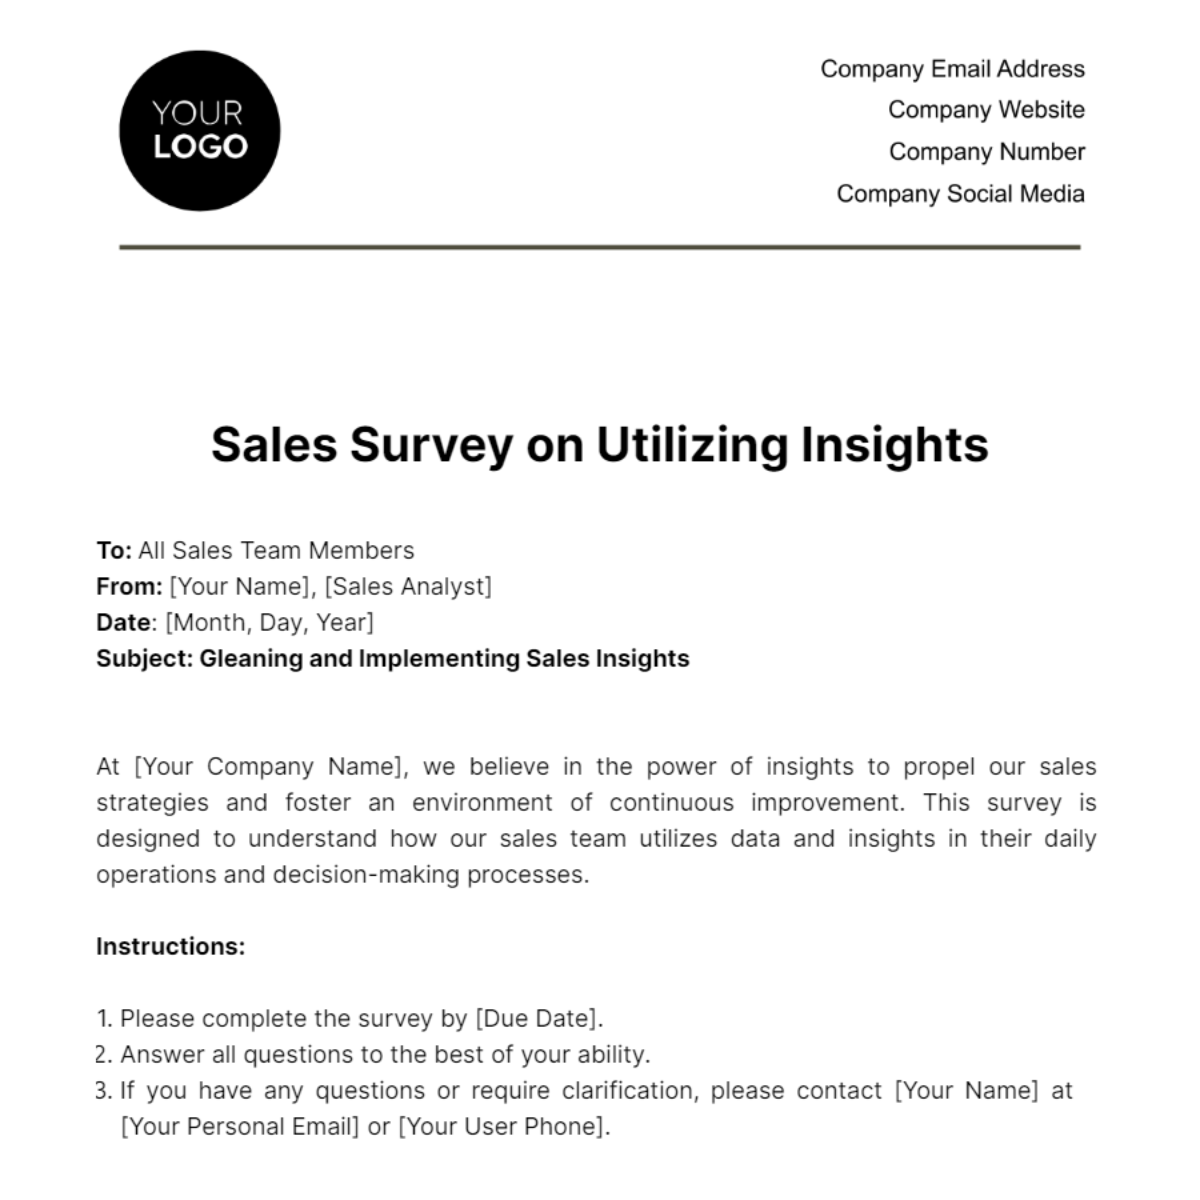 Free Sales Survey on Utilizing Insights Template